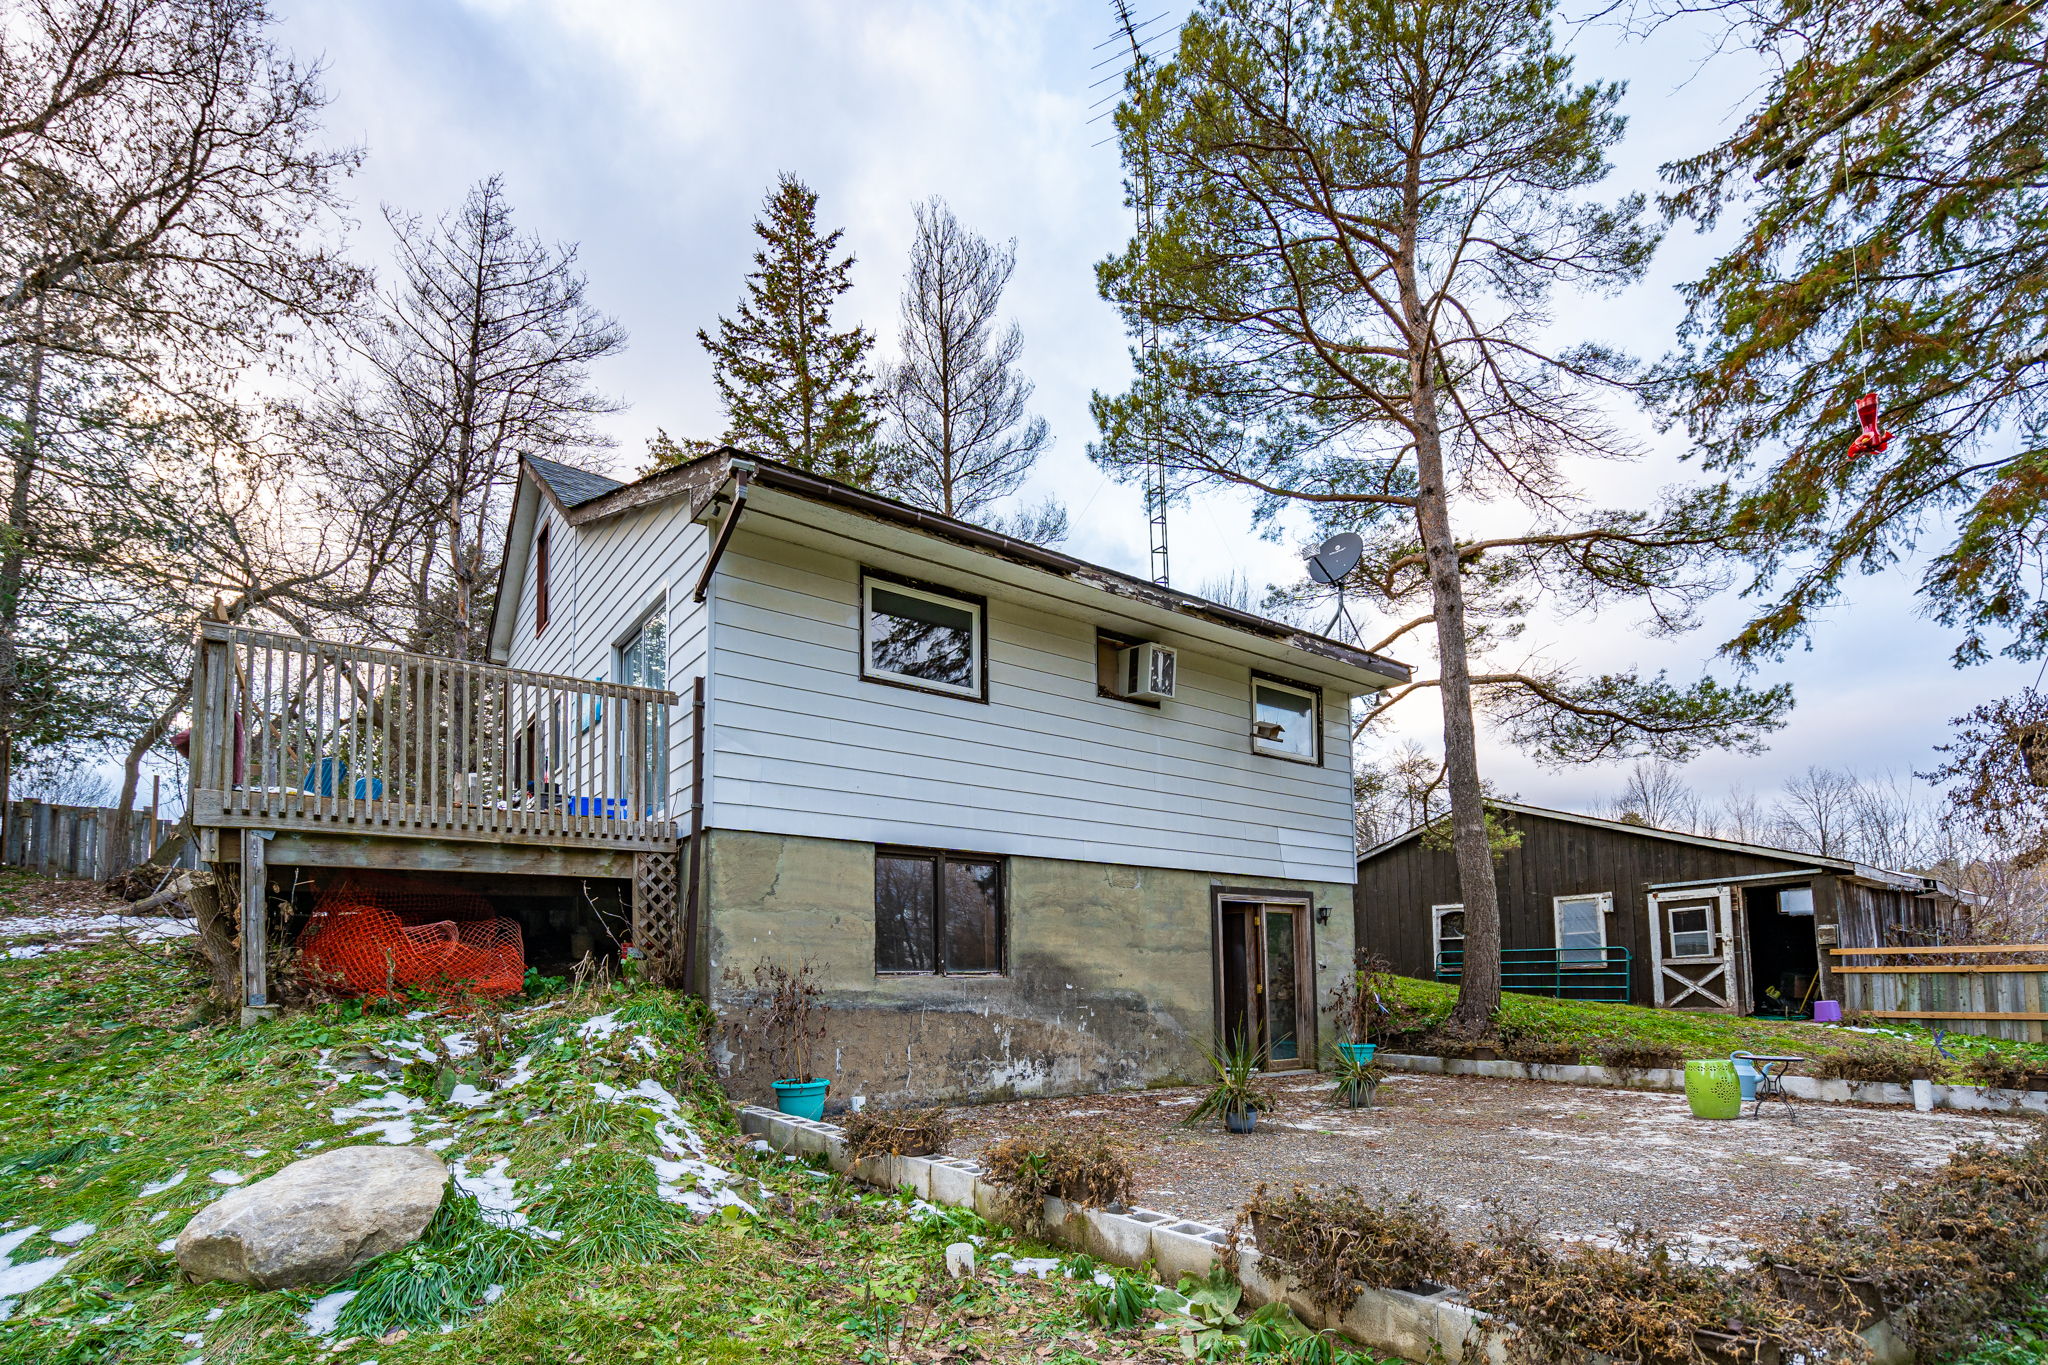  16865 12th Concession, King, ON L0G 1T0, US Photo 18